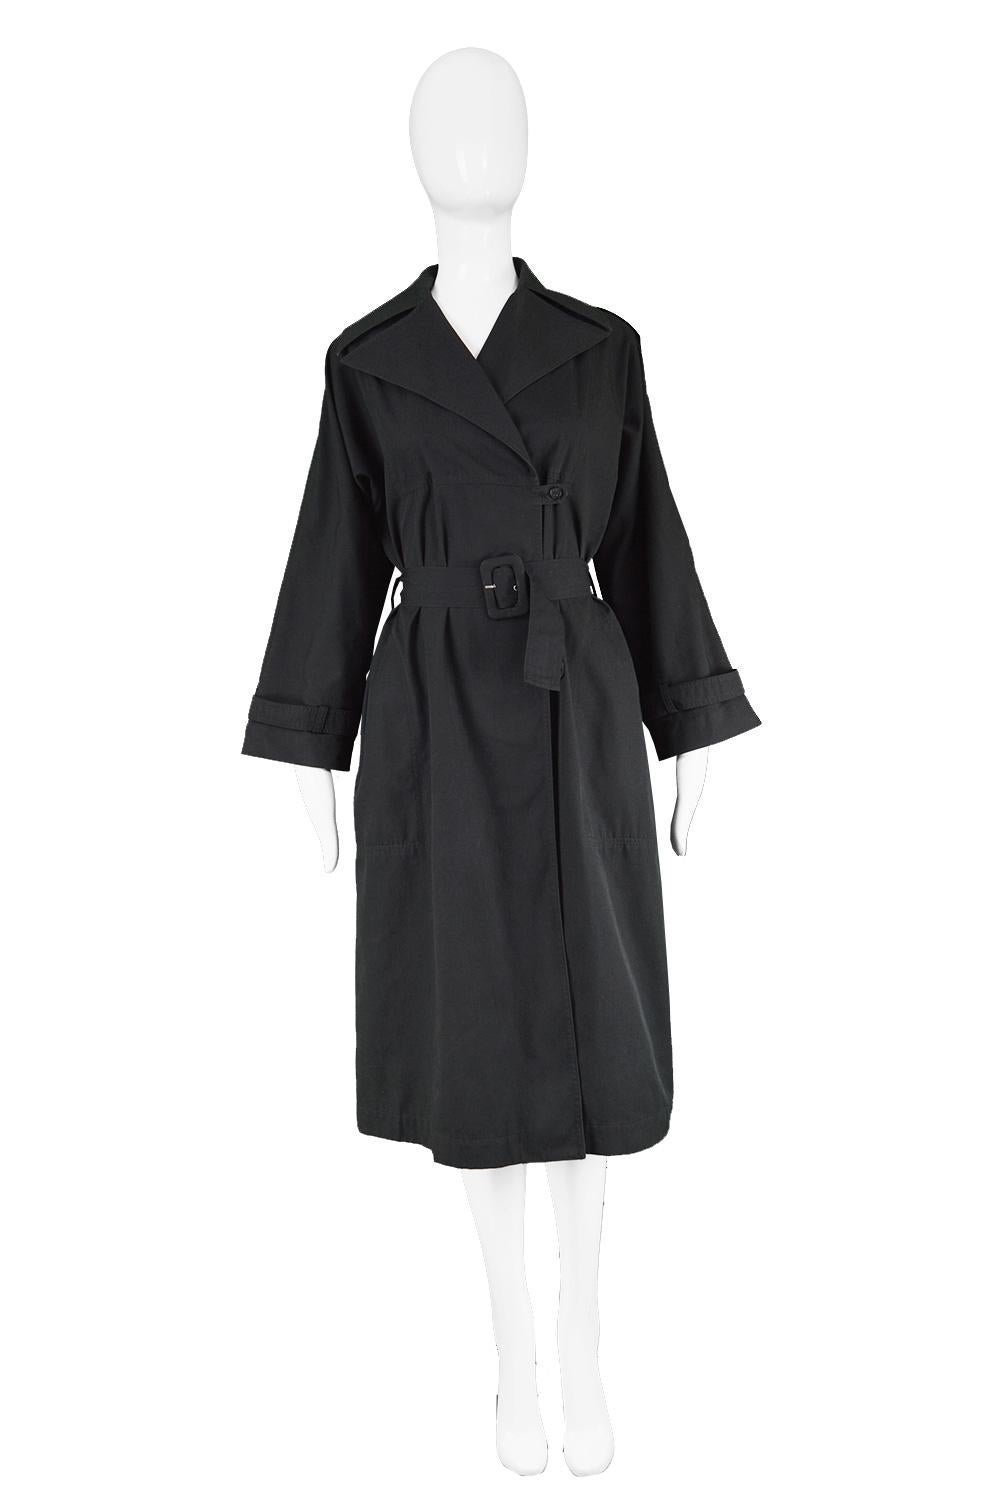 Guy Laroche Vintage Minimalist Women's Black Cotton Trench Coat, 1980s

Estimated Size: UK 10/ US 6/ EU 36, coat is oversized so size is most dependant on the belt. Please check measurements.
Bust - up to 40” / 101cm (meant to have a loose